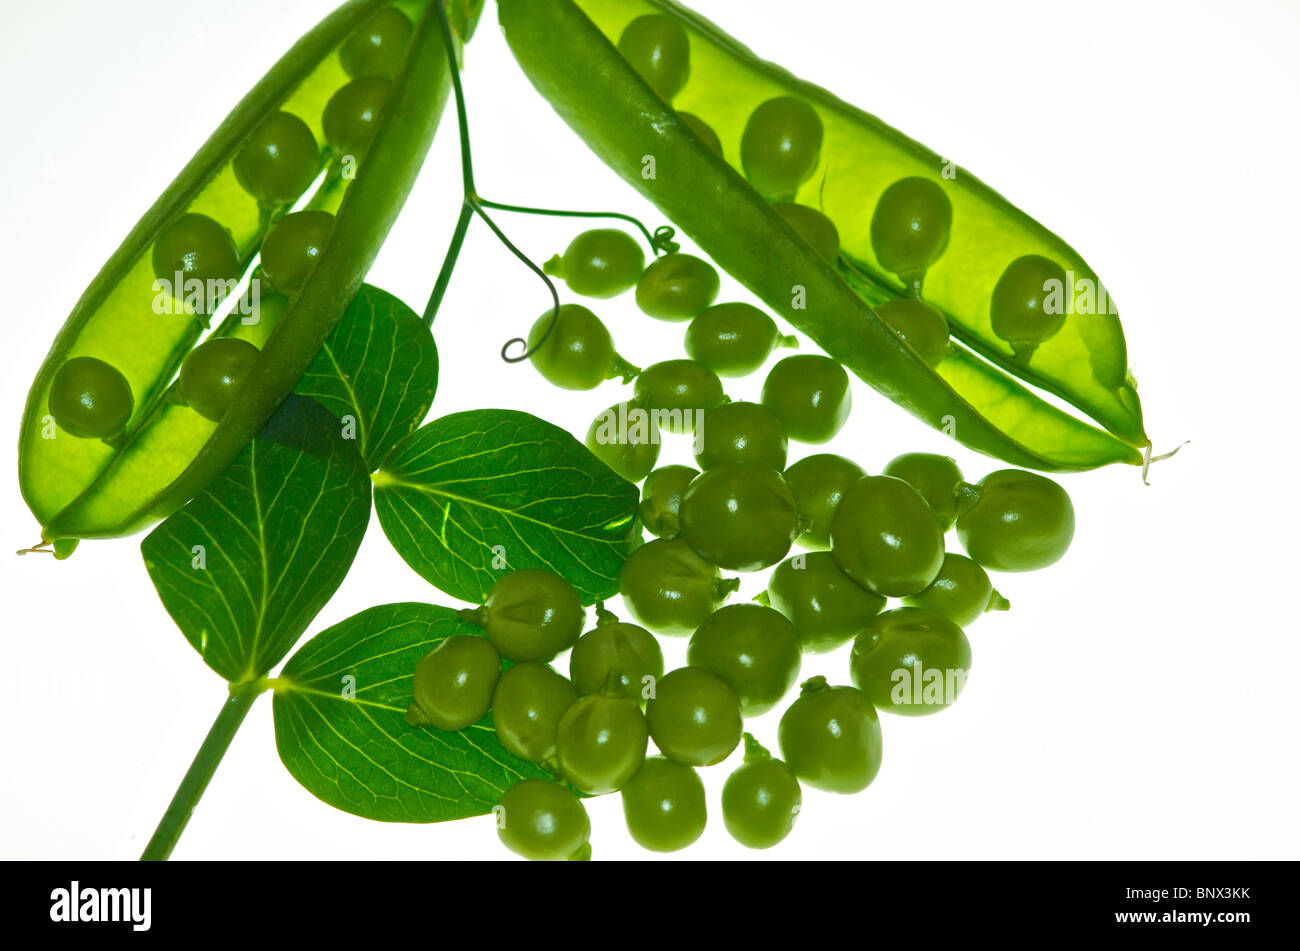 Peas Garden Peas organic displayed as a cut-out image of this favourite garden vegetable Stock Photo